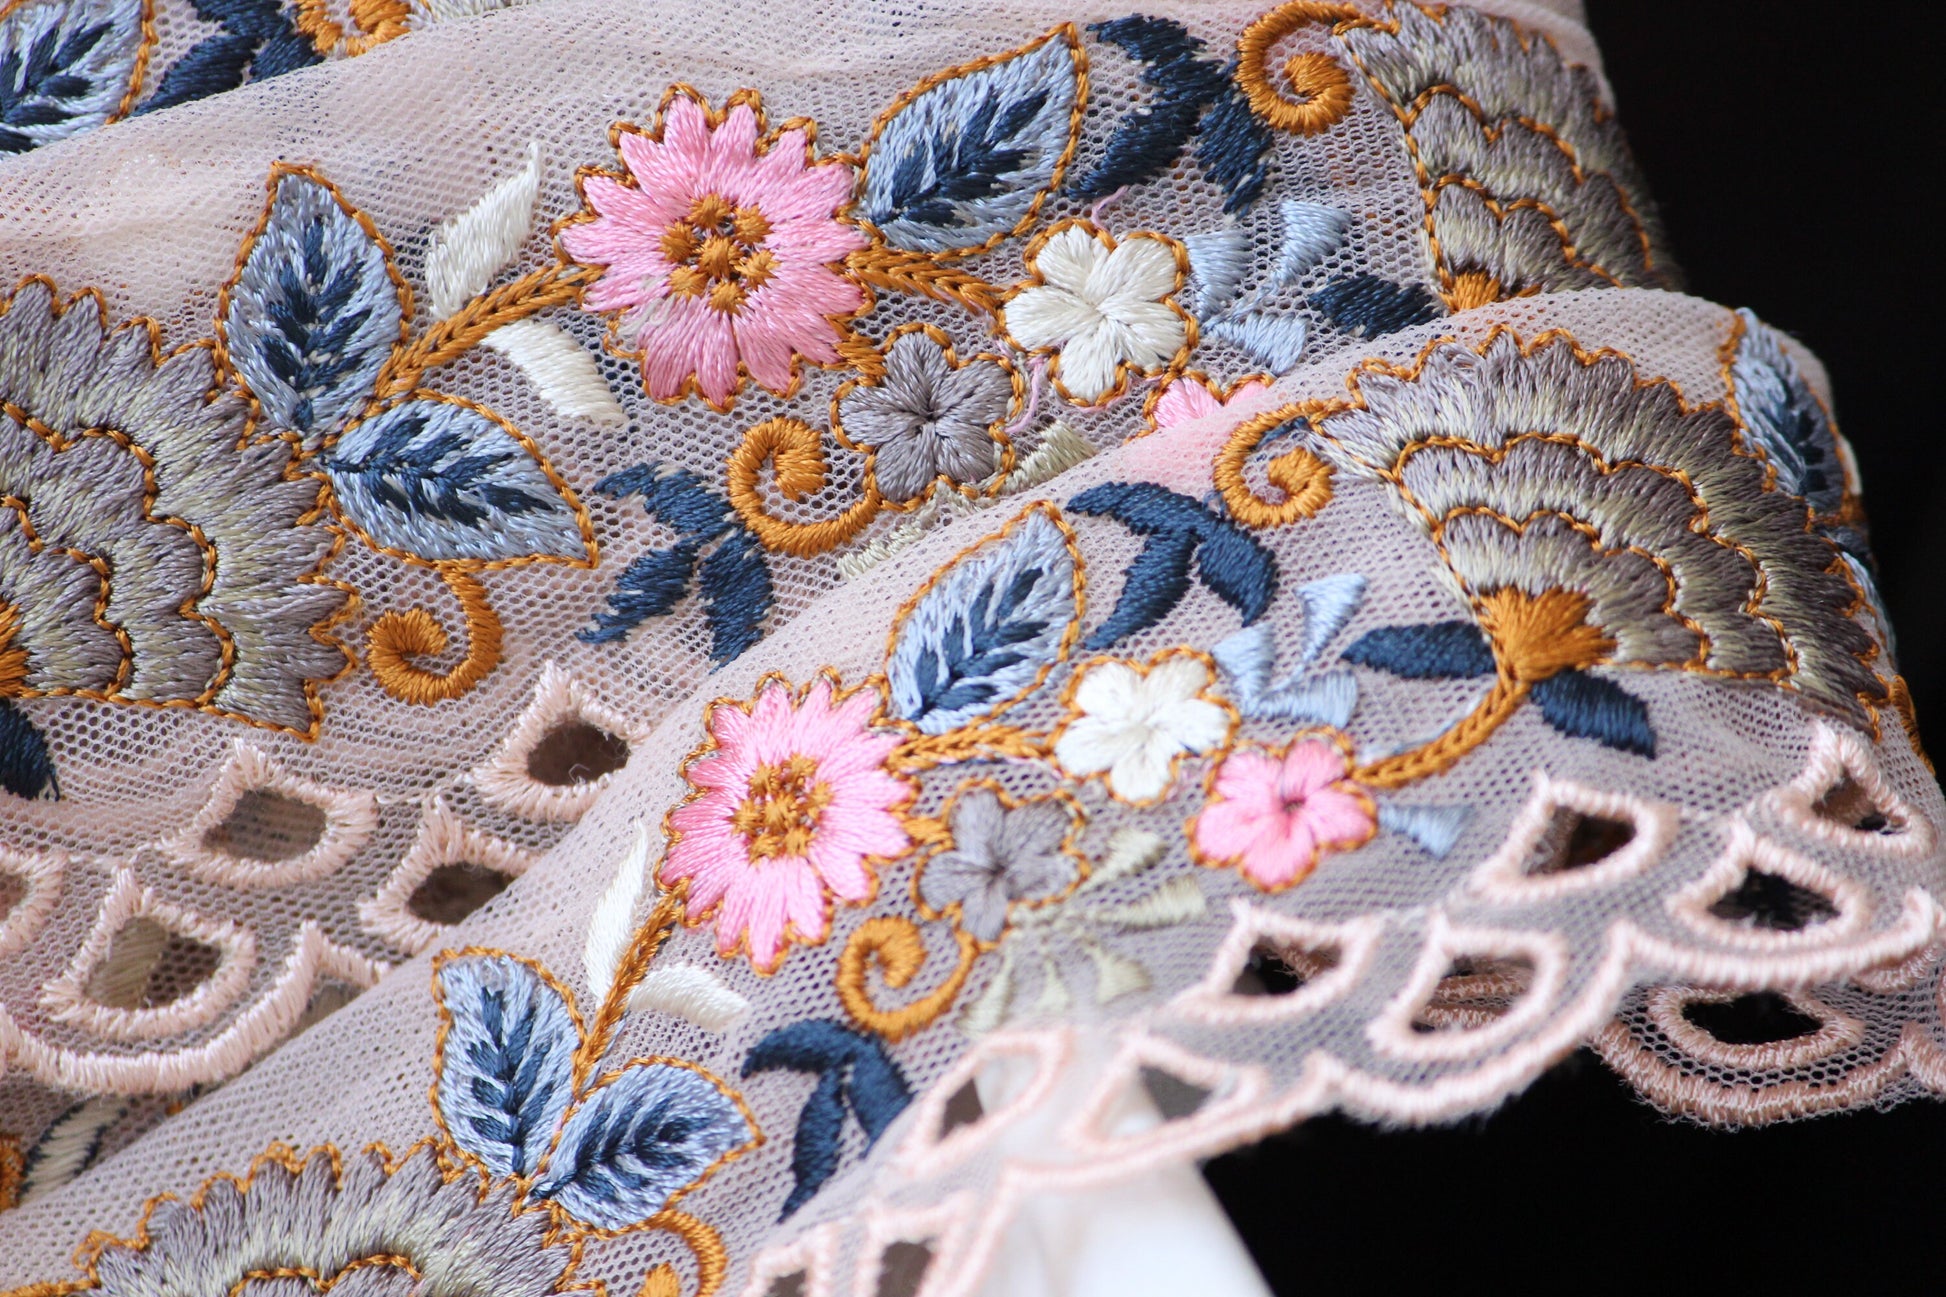 1 yard-Baby pink floral thread embroidery ribbon on mesh fabric with scallop edge-Baby pink and blue floral trim with scallop highlights